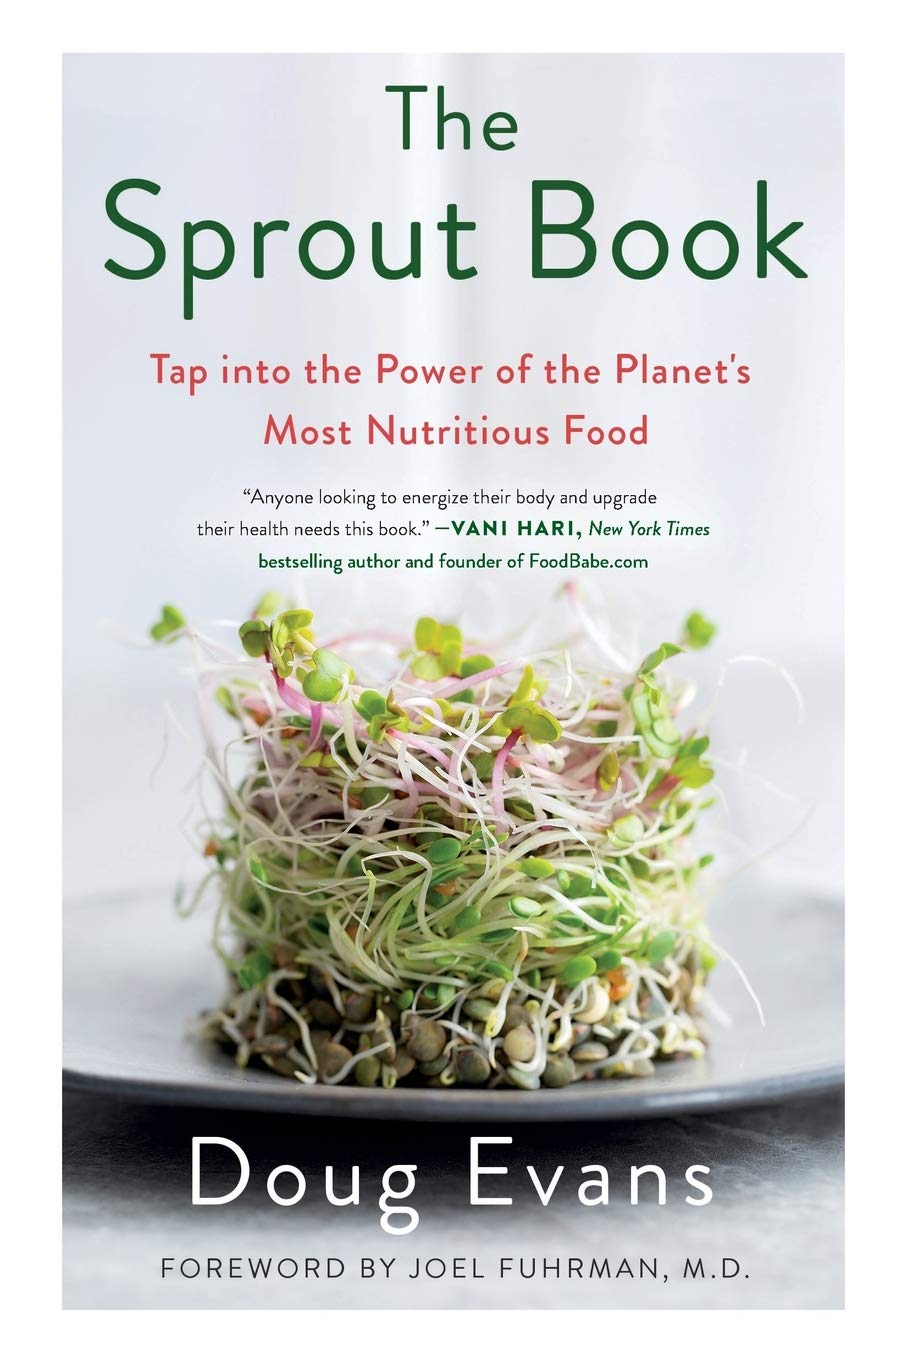 The Sprout Book: Tap into the Power of the Planet's Most Nutritious Food | Doug Evans - Sproutman